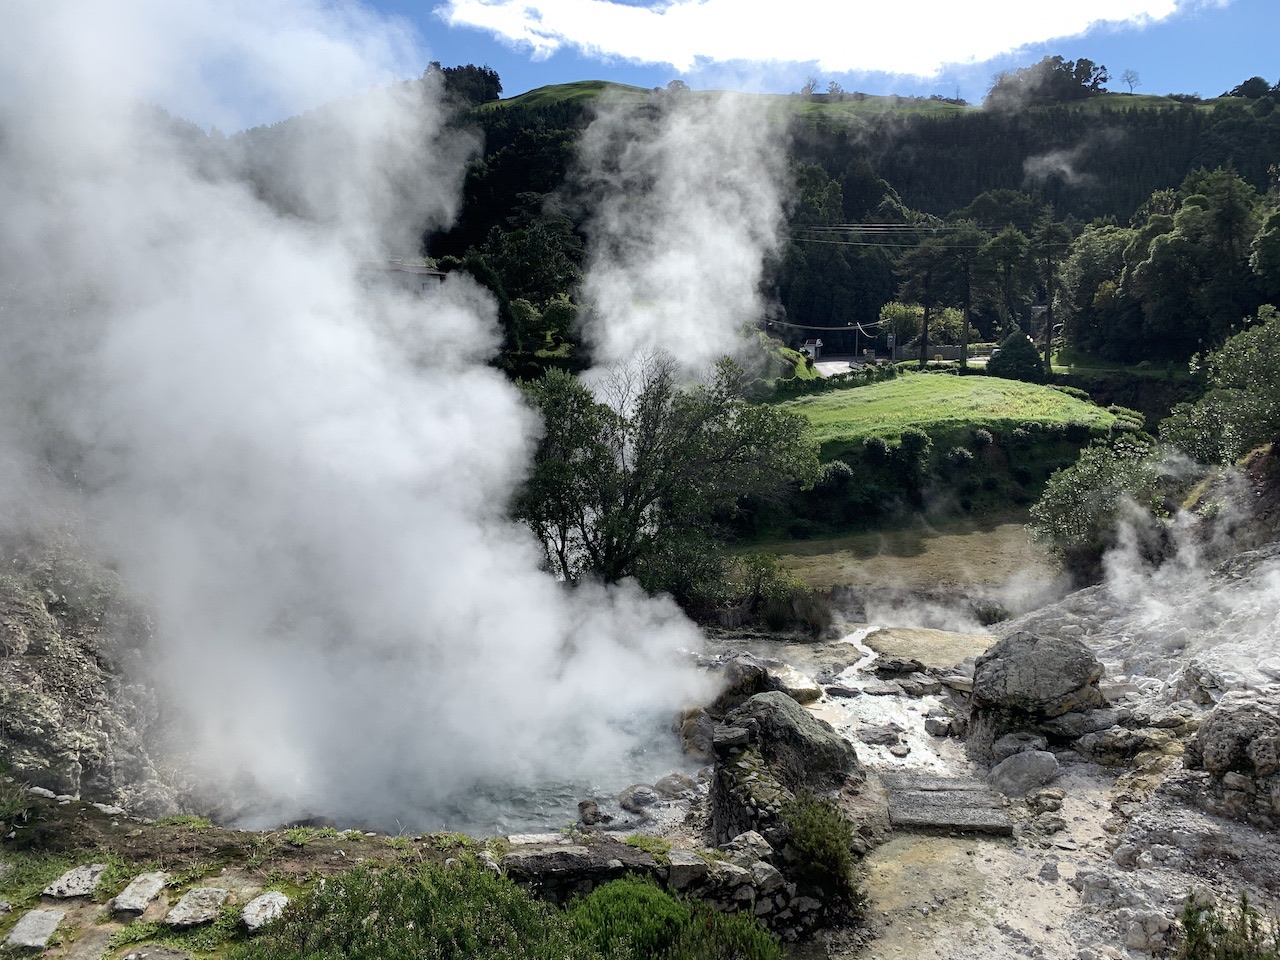 Drinking Volcanic Water in Furnas